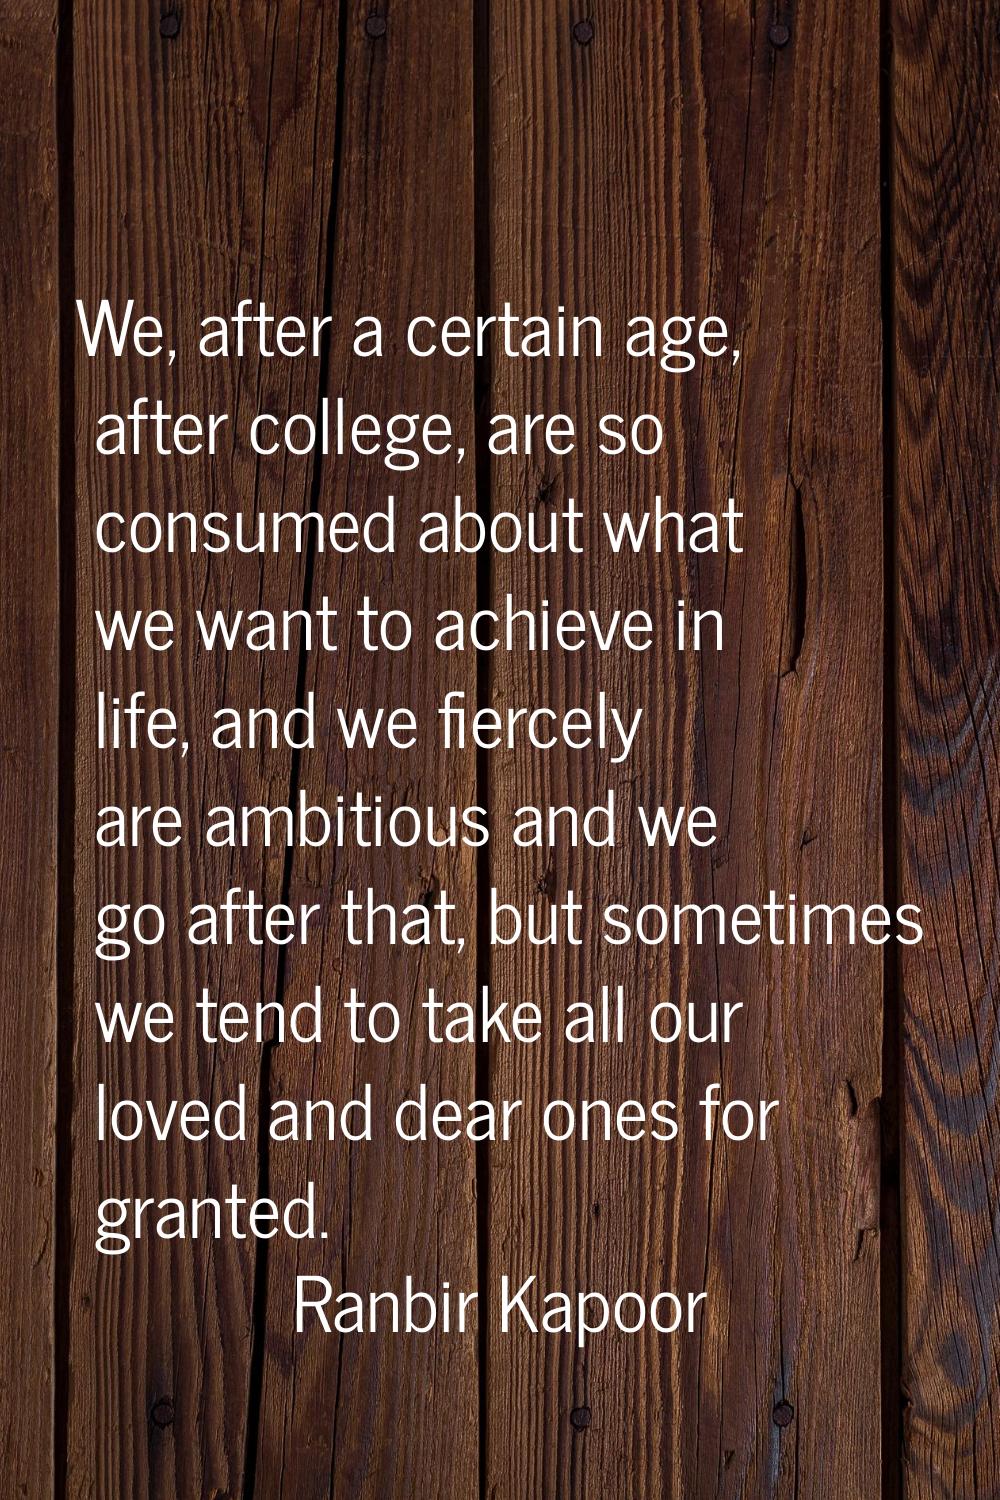 We, after a certain age, after college, are so consumed about what we want to achieve in life, and 